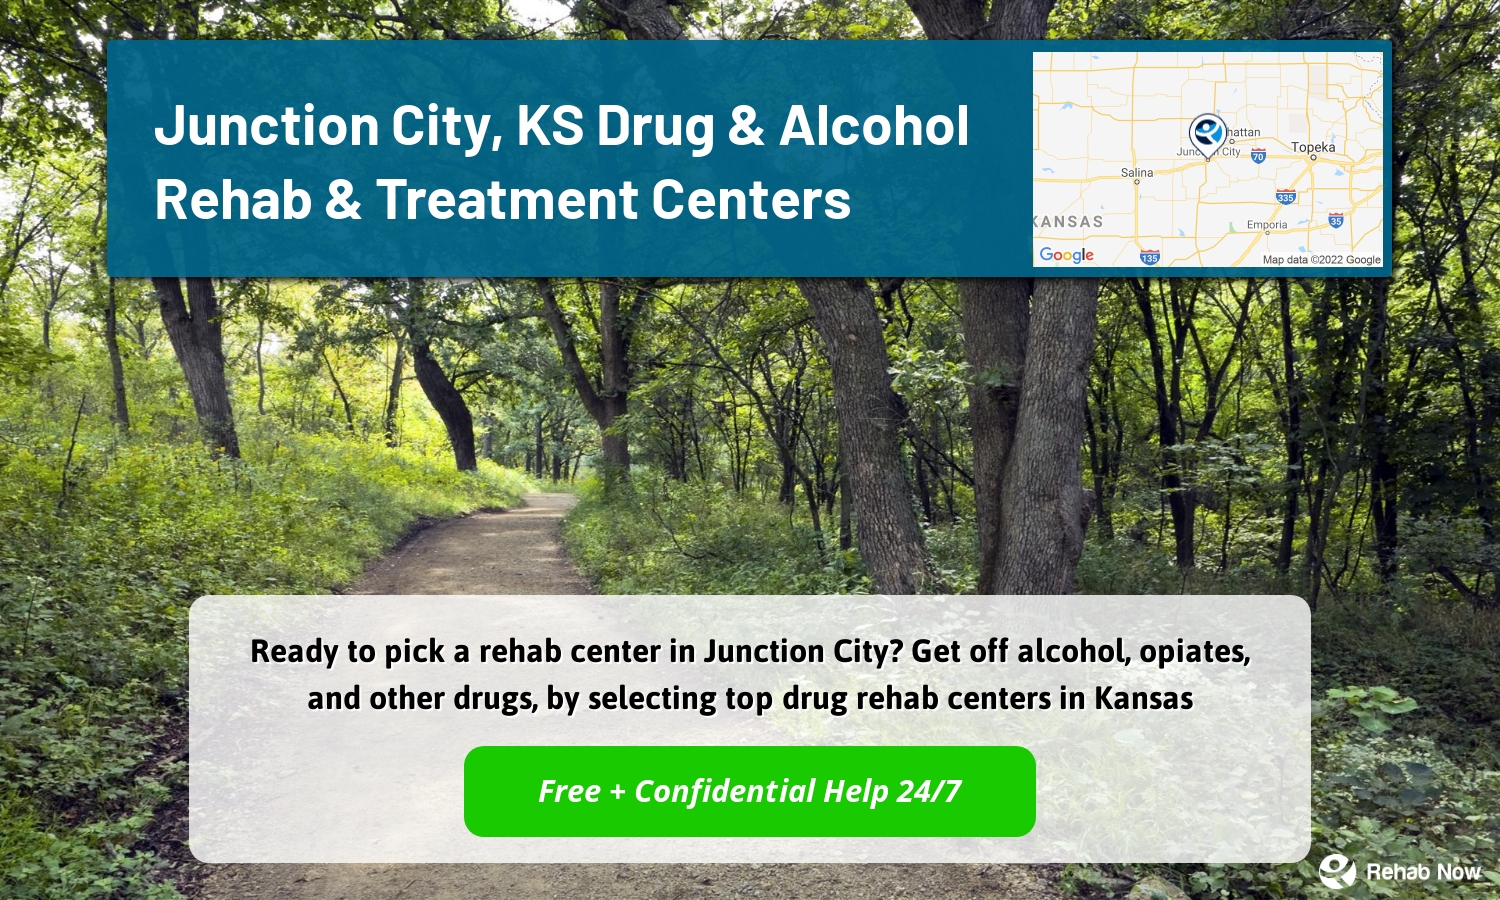 Ready to pick a rehab center in Junction City? Get off alcohol, opiates, and other drugs, by selecting top drug rehab centers in Kansas